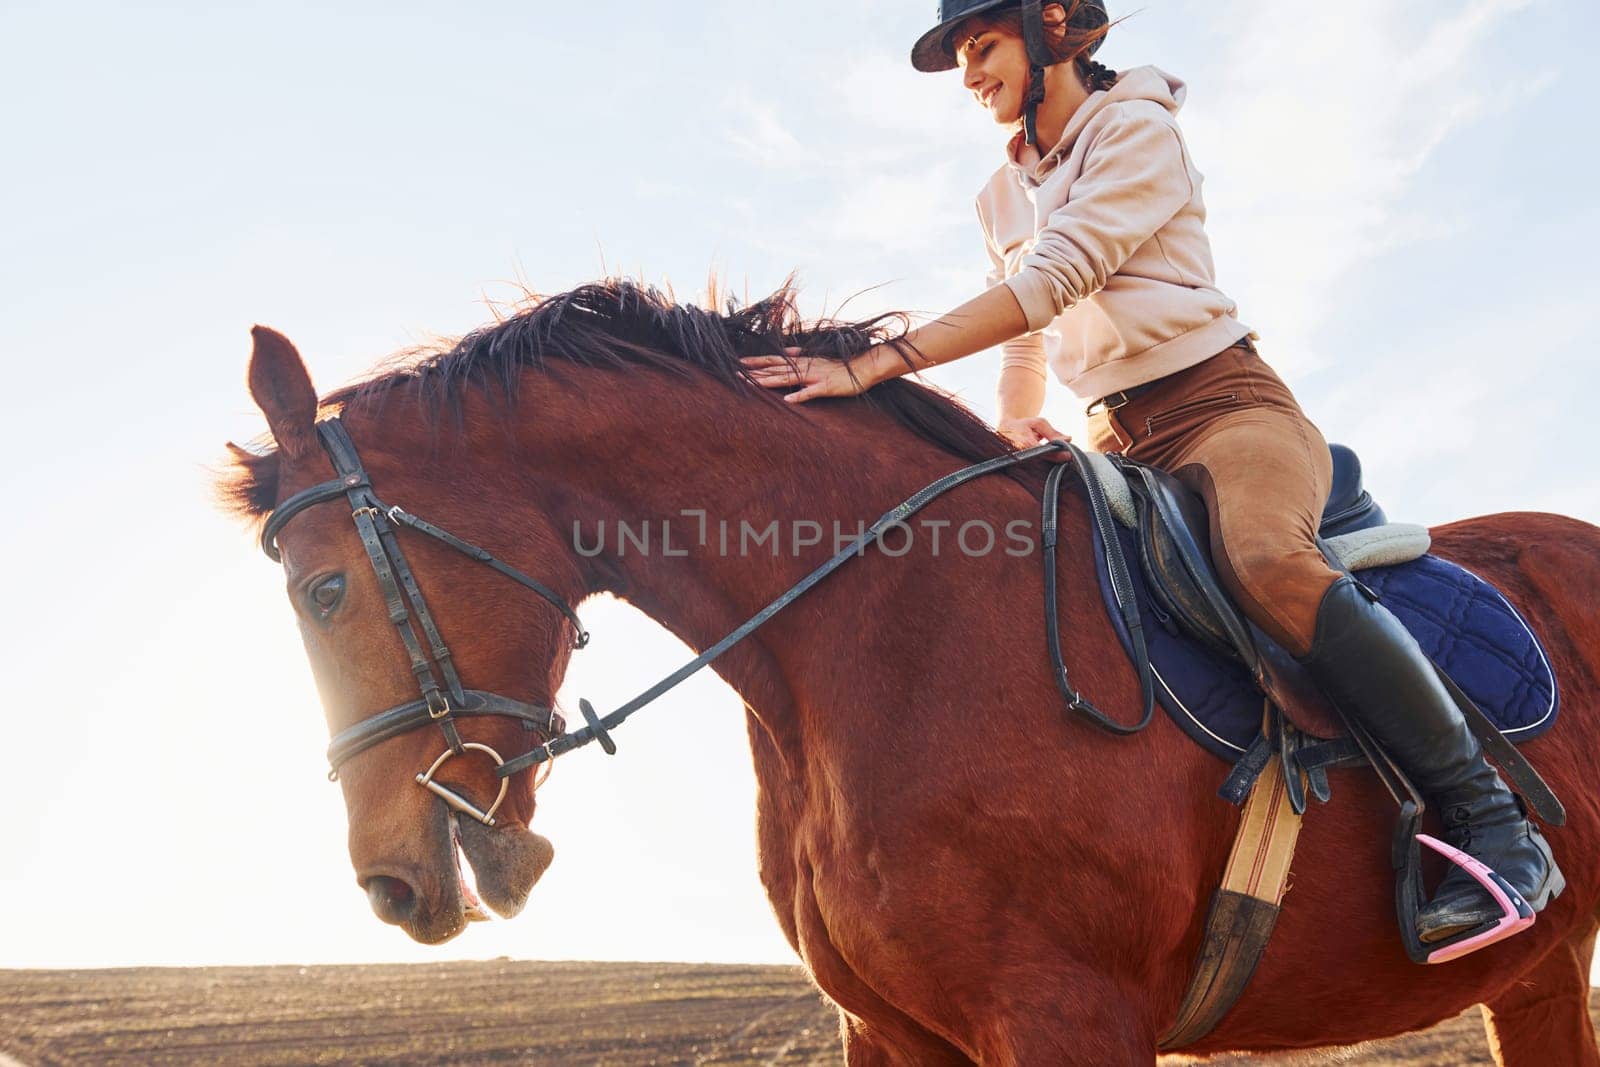 Young woman in protective hat with her horse in agriculture field at sunny daytime by Standret